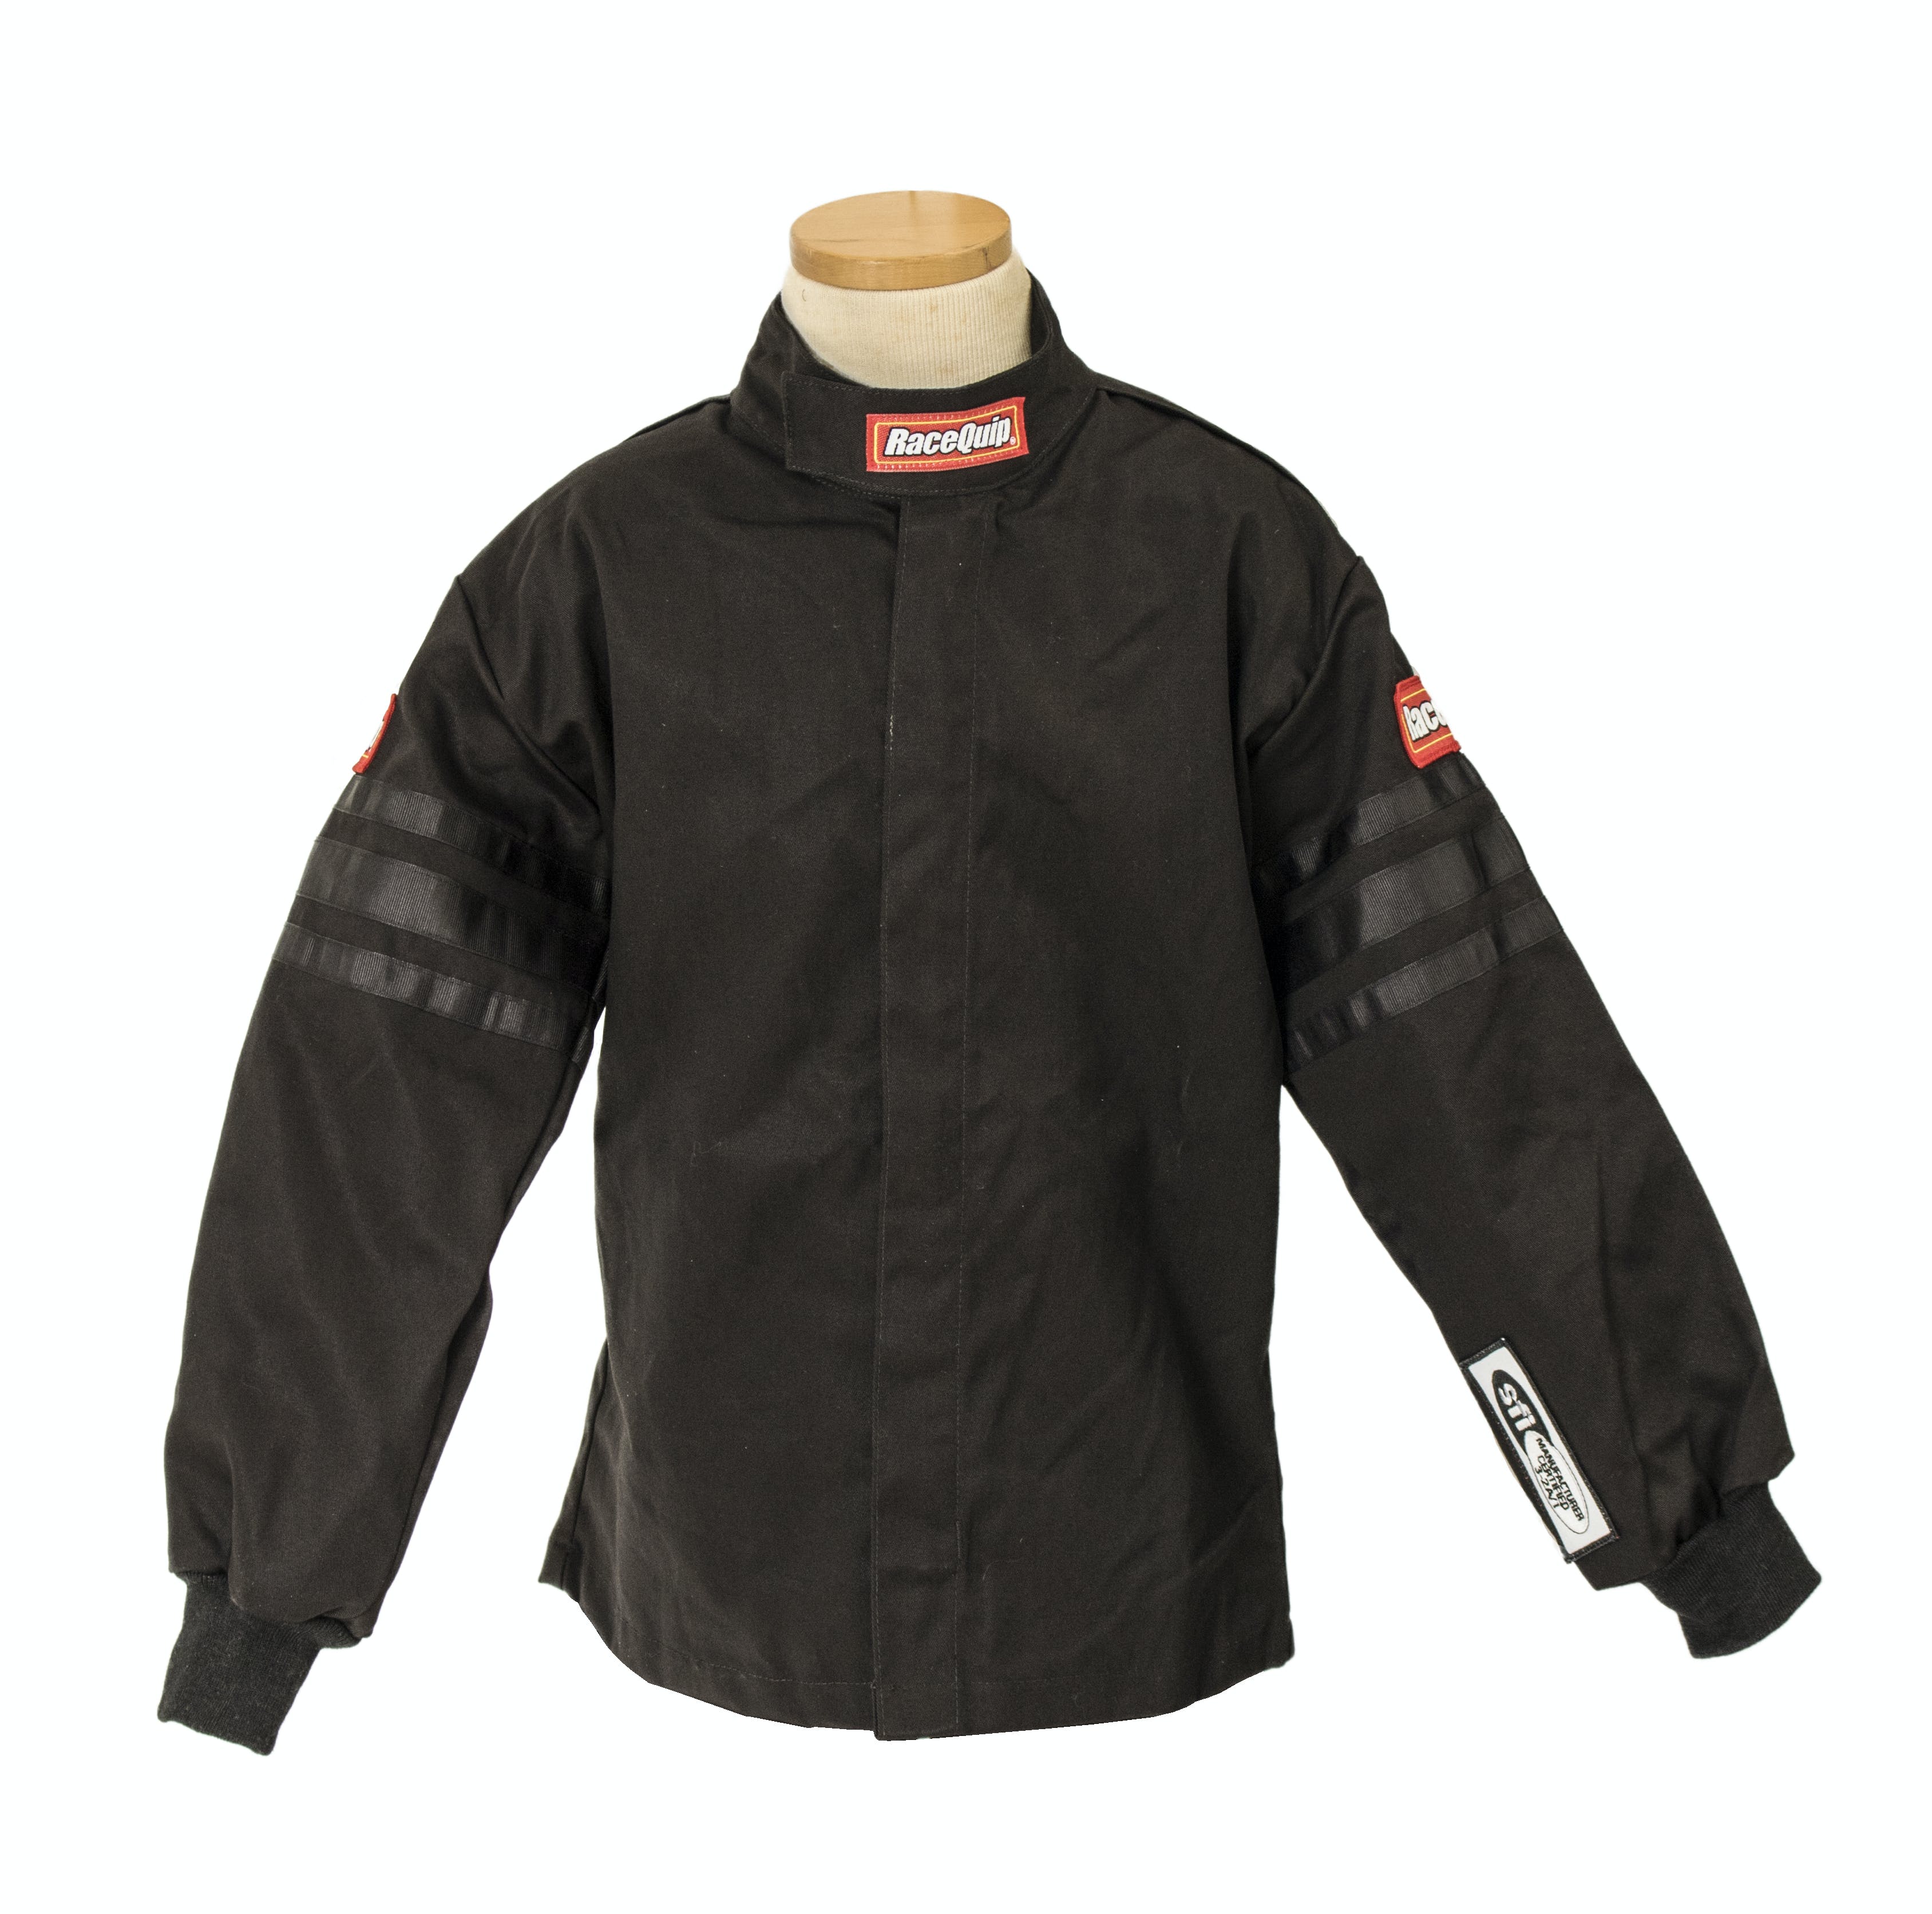 RaceQuip 1969992 SFI-1 Pyrovatex Single-Layer Youth Racing Fire Jacket (Black, Small)